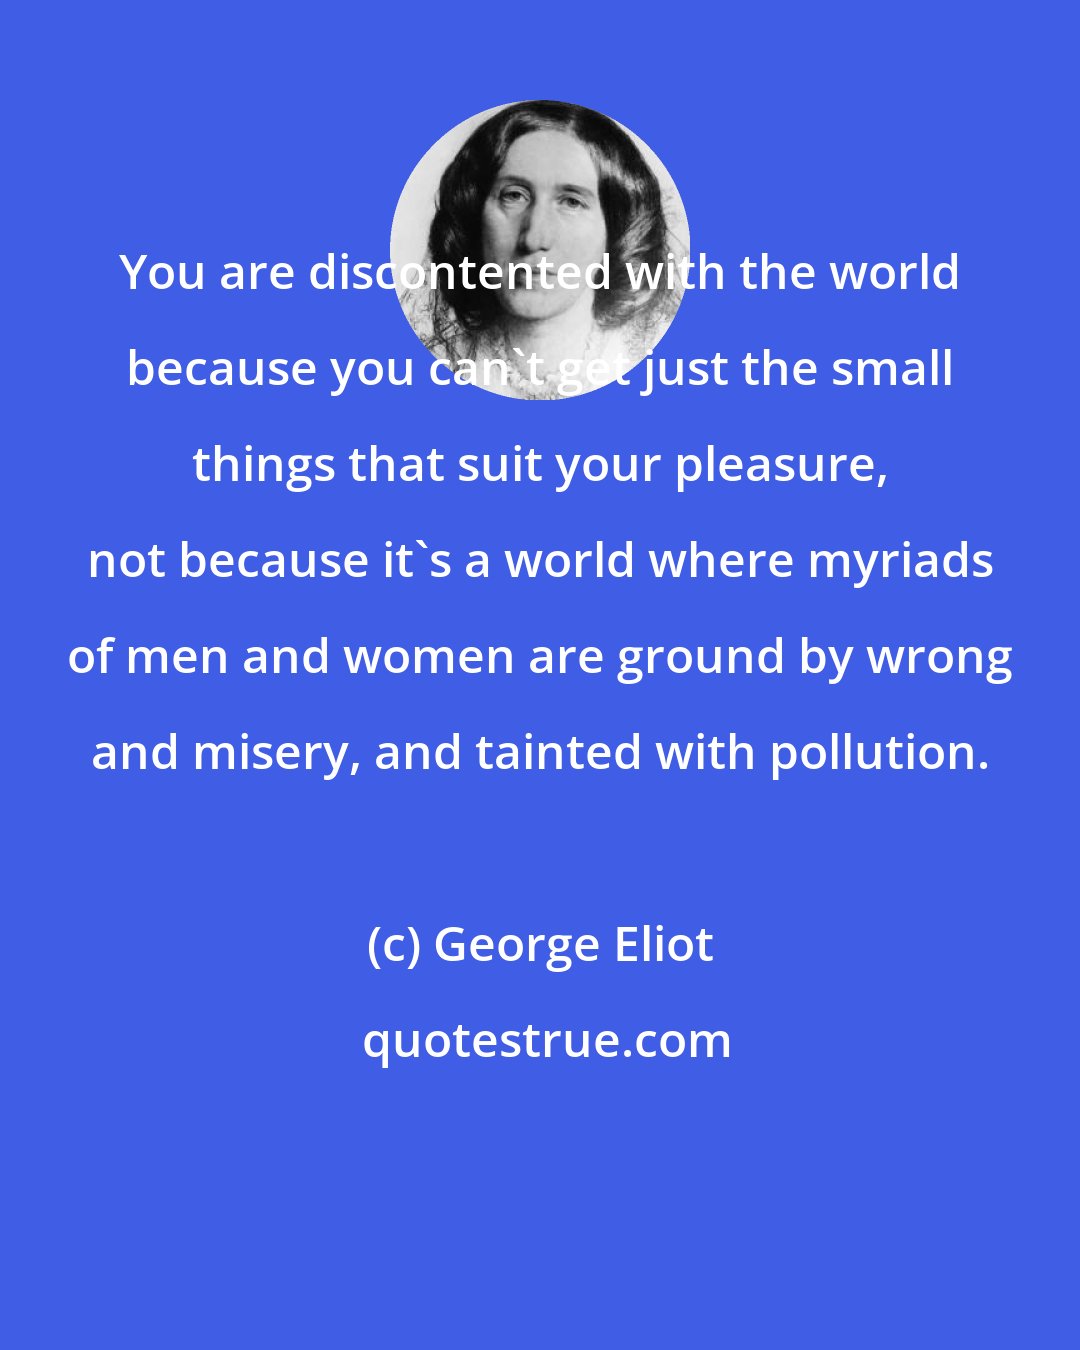 George Eliot: You are discontented with the world because you can't get just the small things that suit your pleasure, not because it's a world where myriads of men and women are ground by wrong and misery, and tainted with pollution.